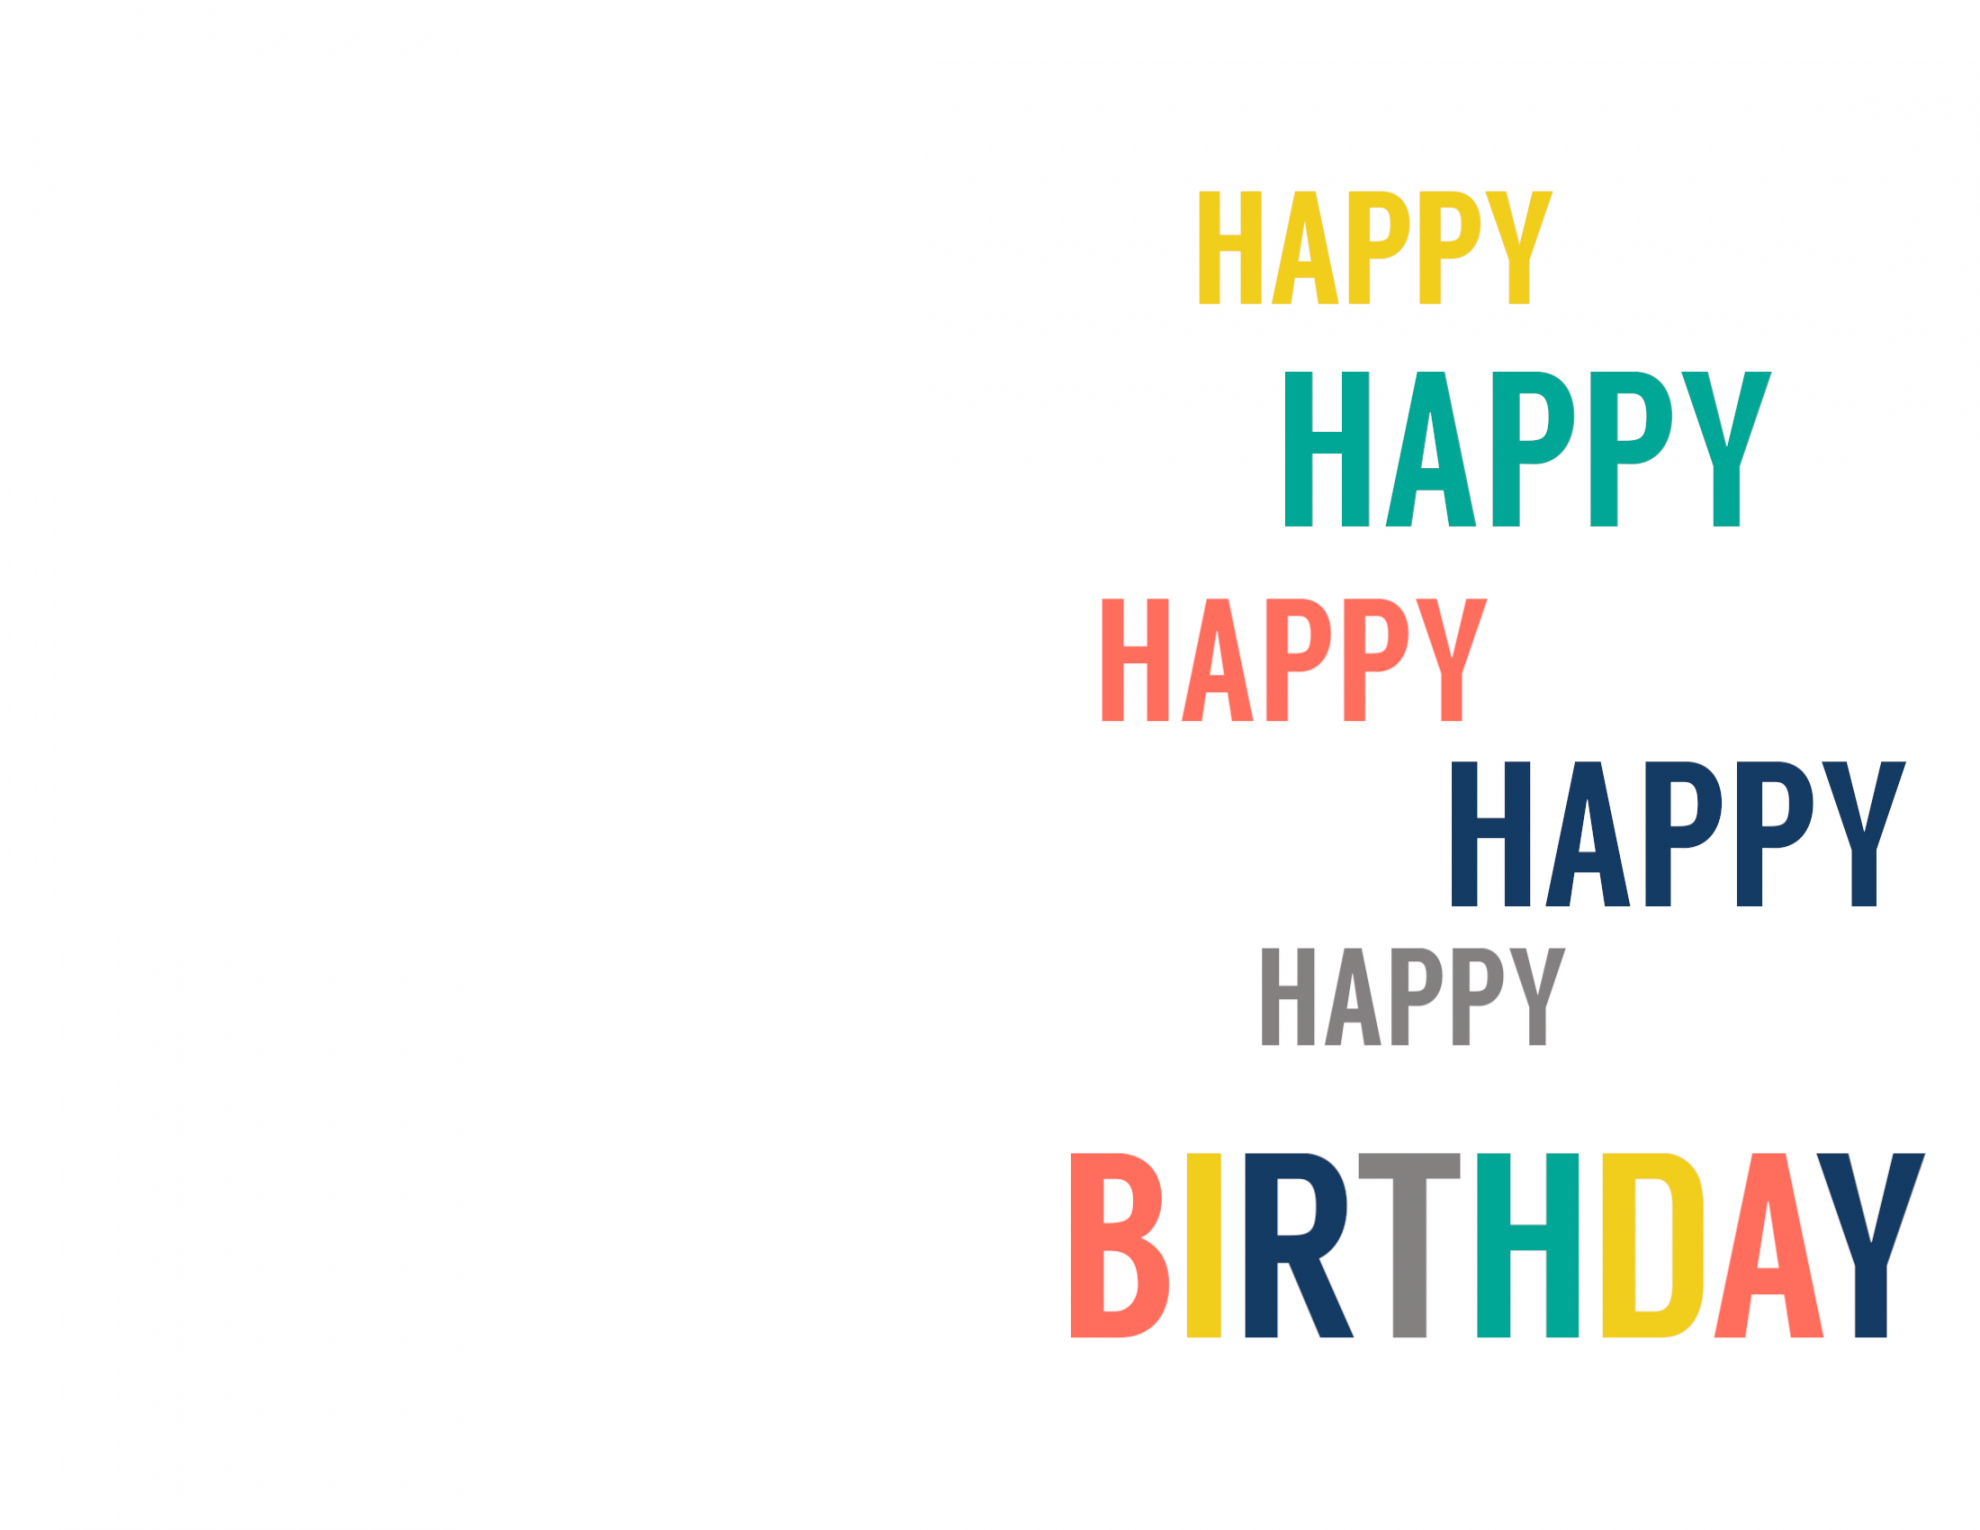 Free Printable Birthday Cards - Paper Trail Design